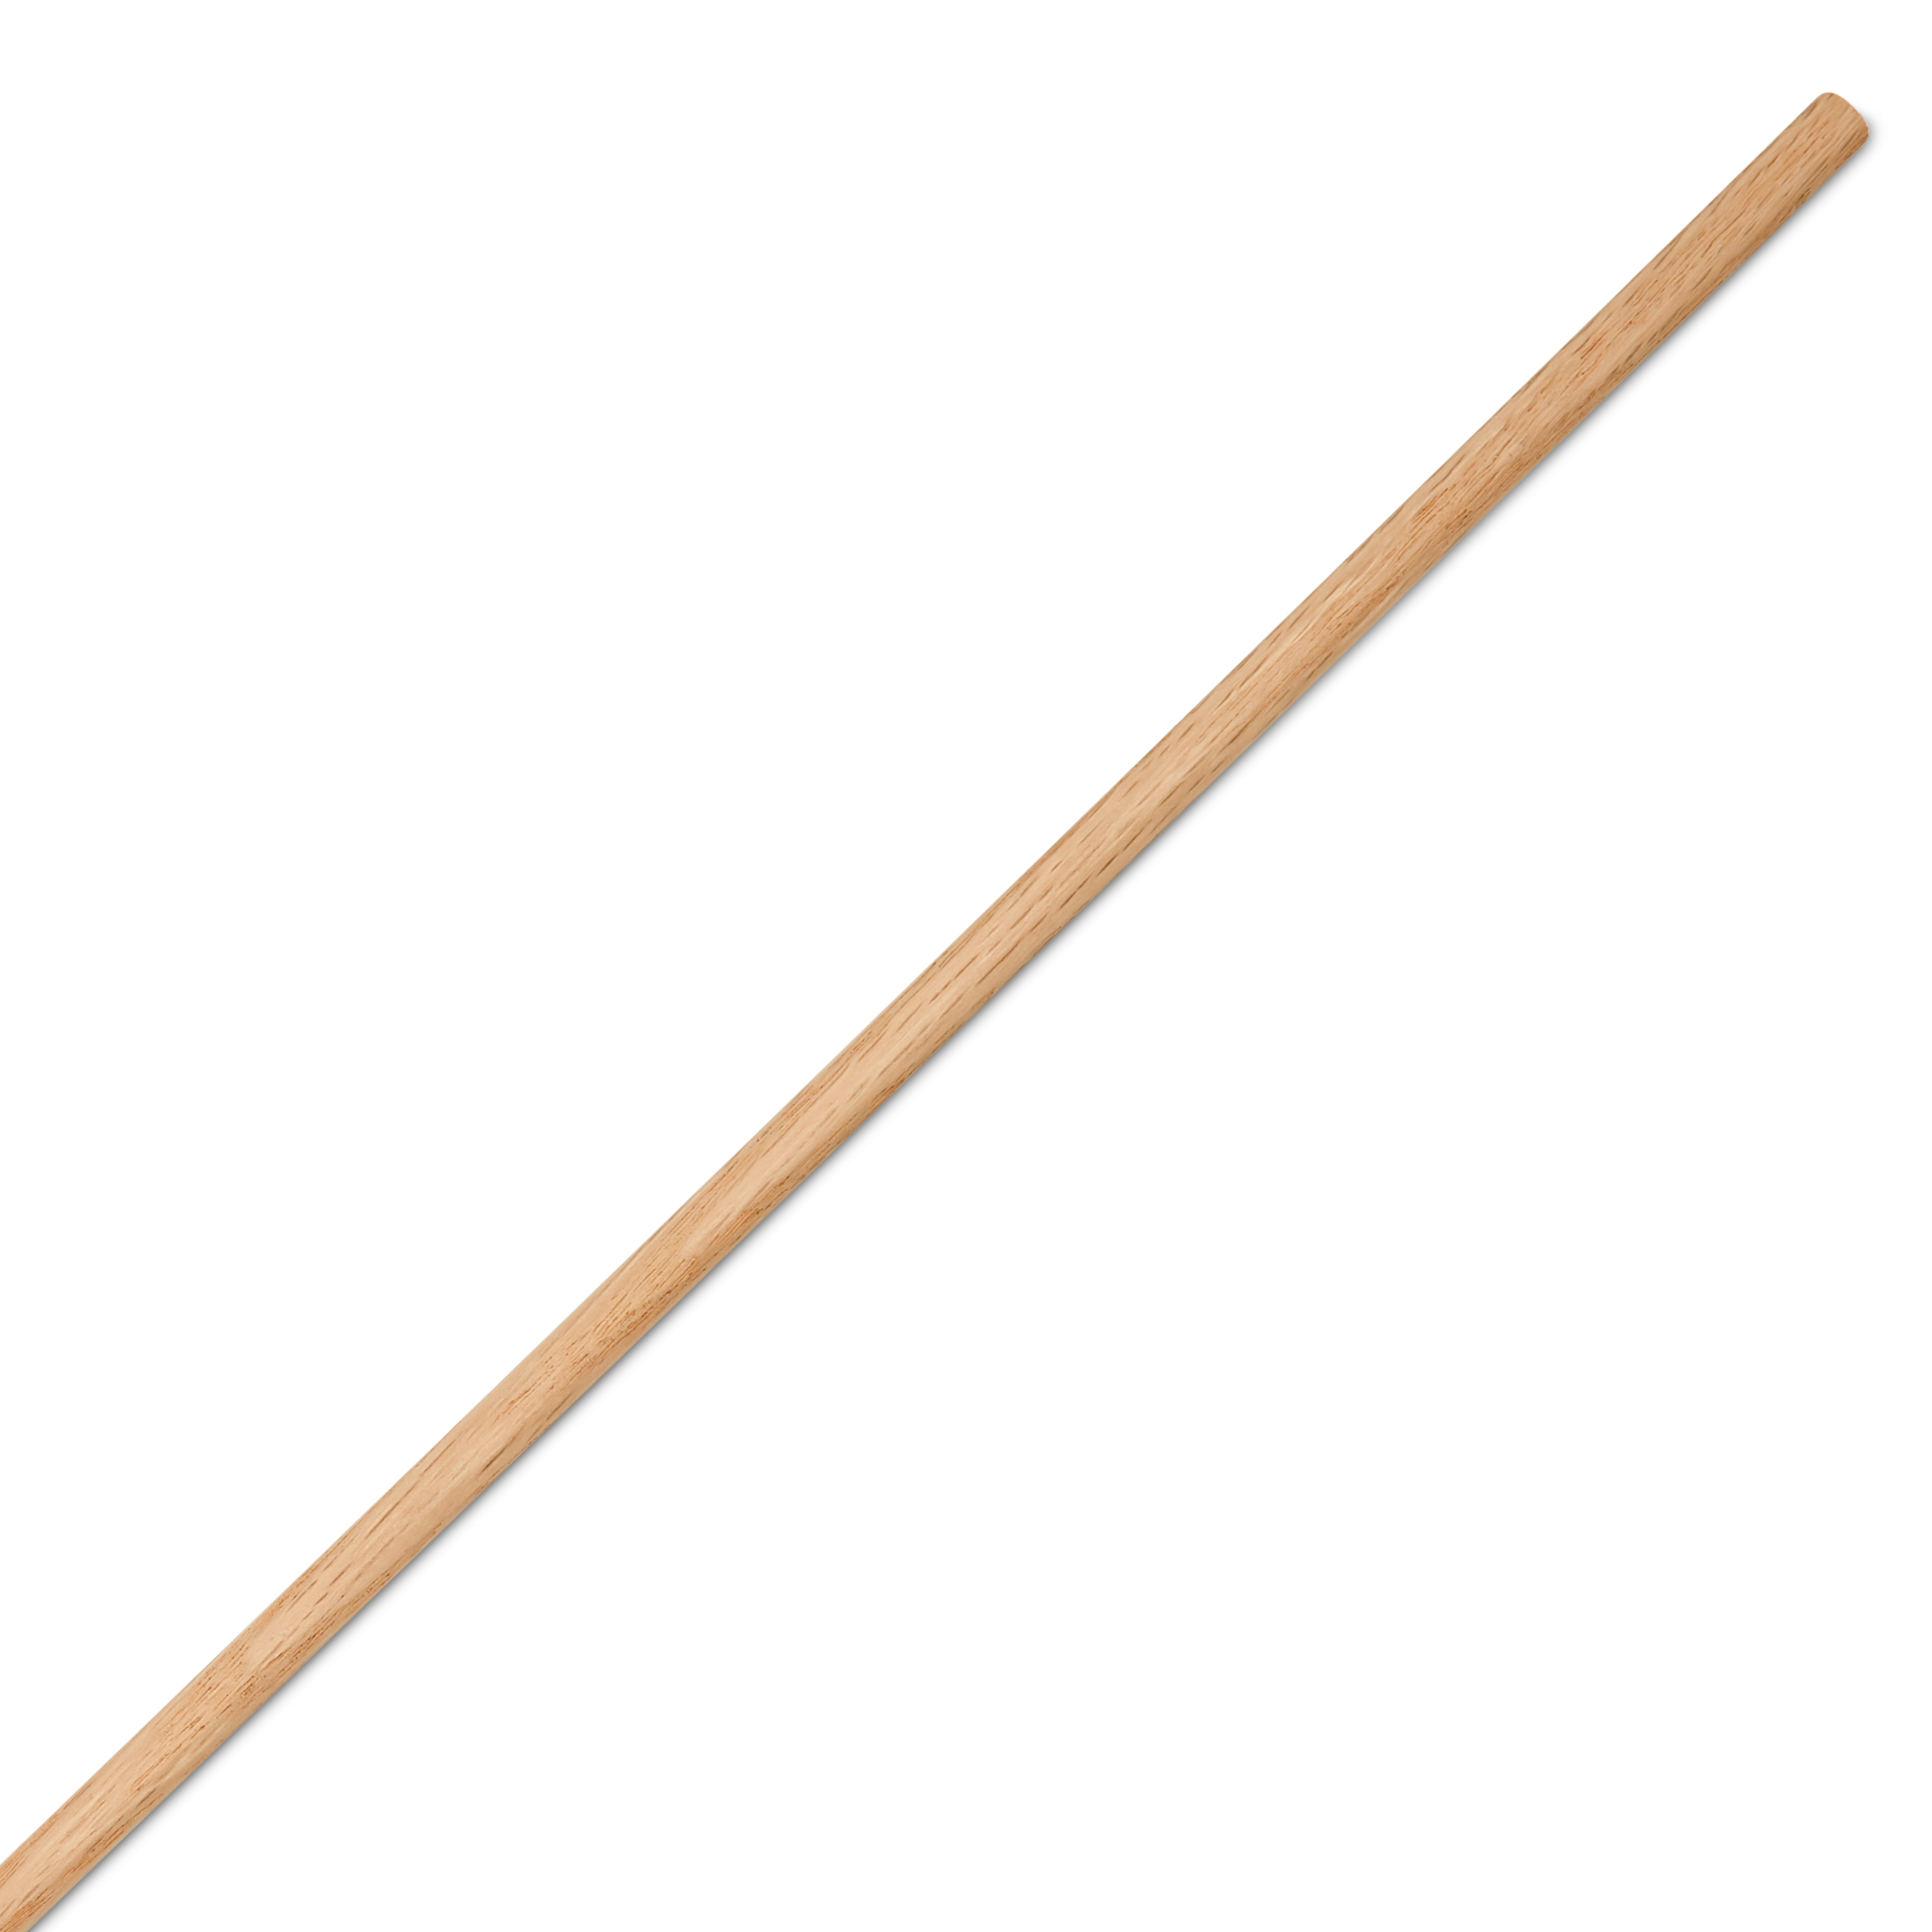 Dowel Rods Wood Sticks Wooden Dowel Rods - 5/16 x 24 Inch Unfinished  Hardwood Sticks - for Crafts and DIYers - 50 Pieces by Woodpeckers